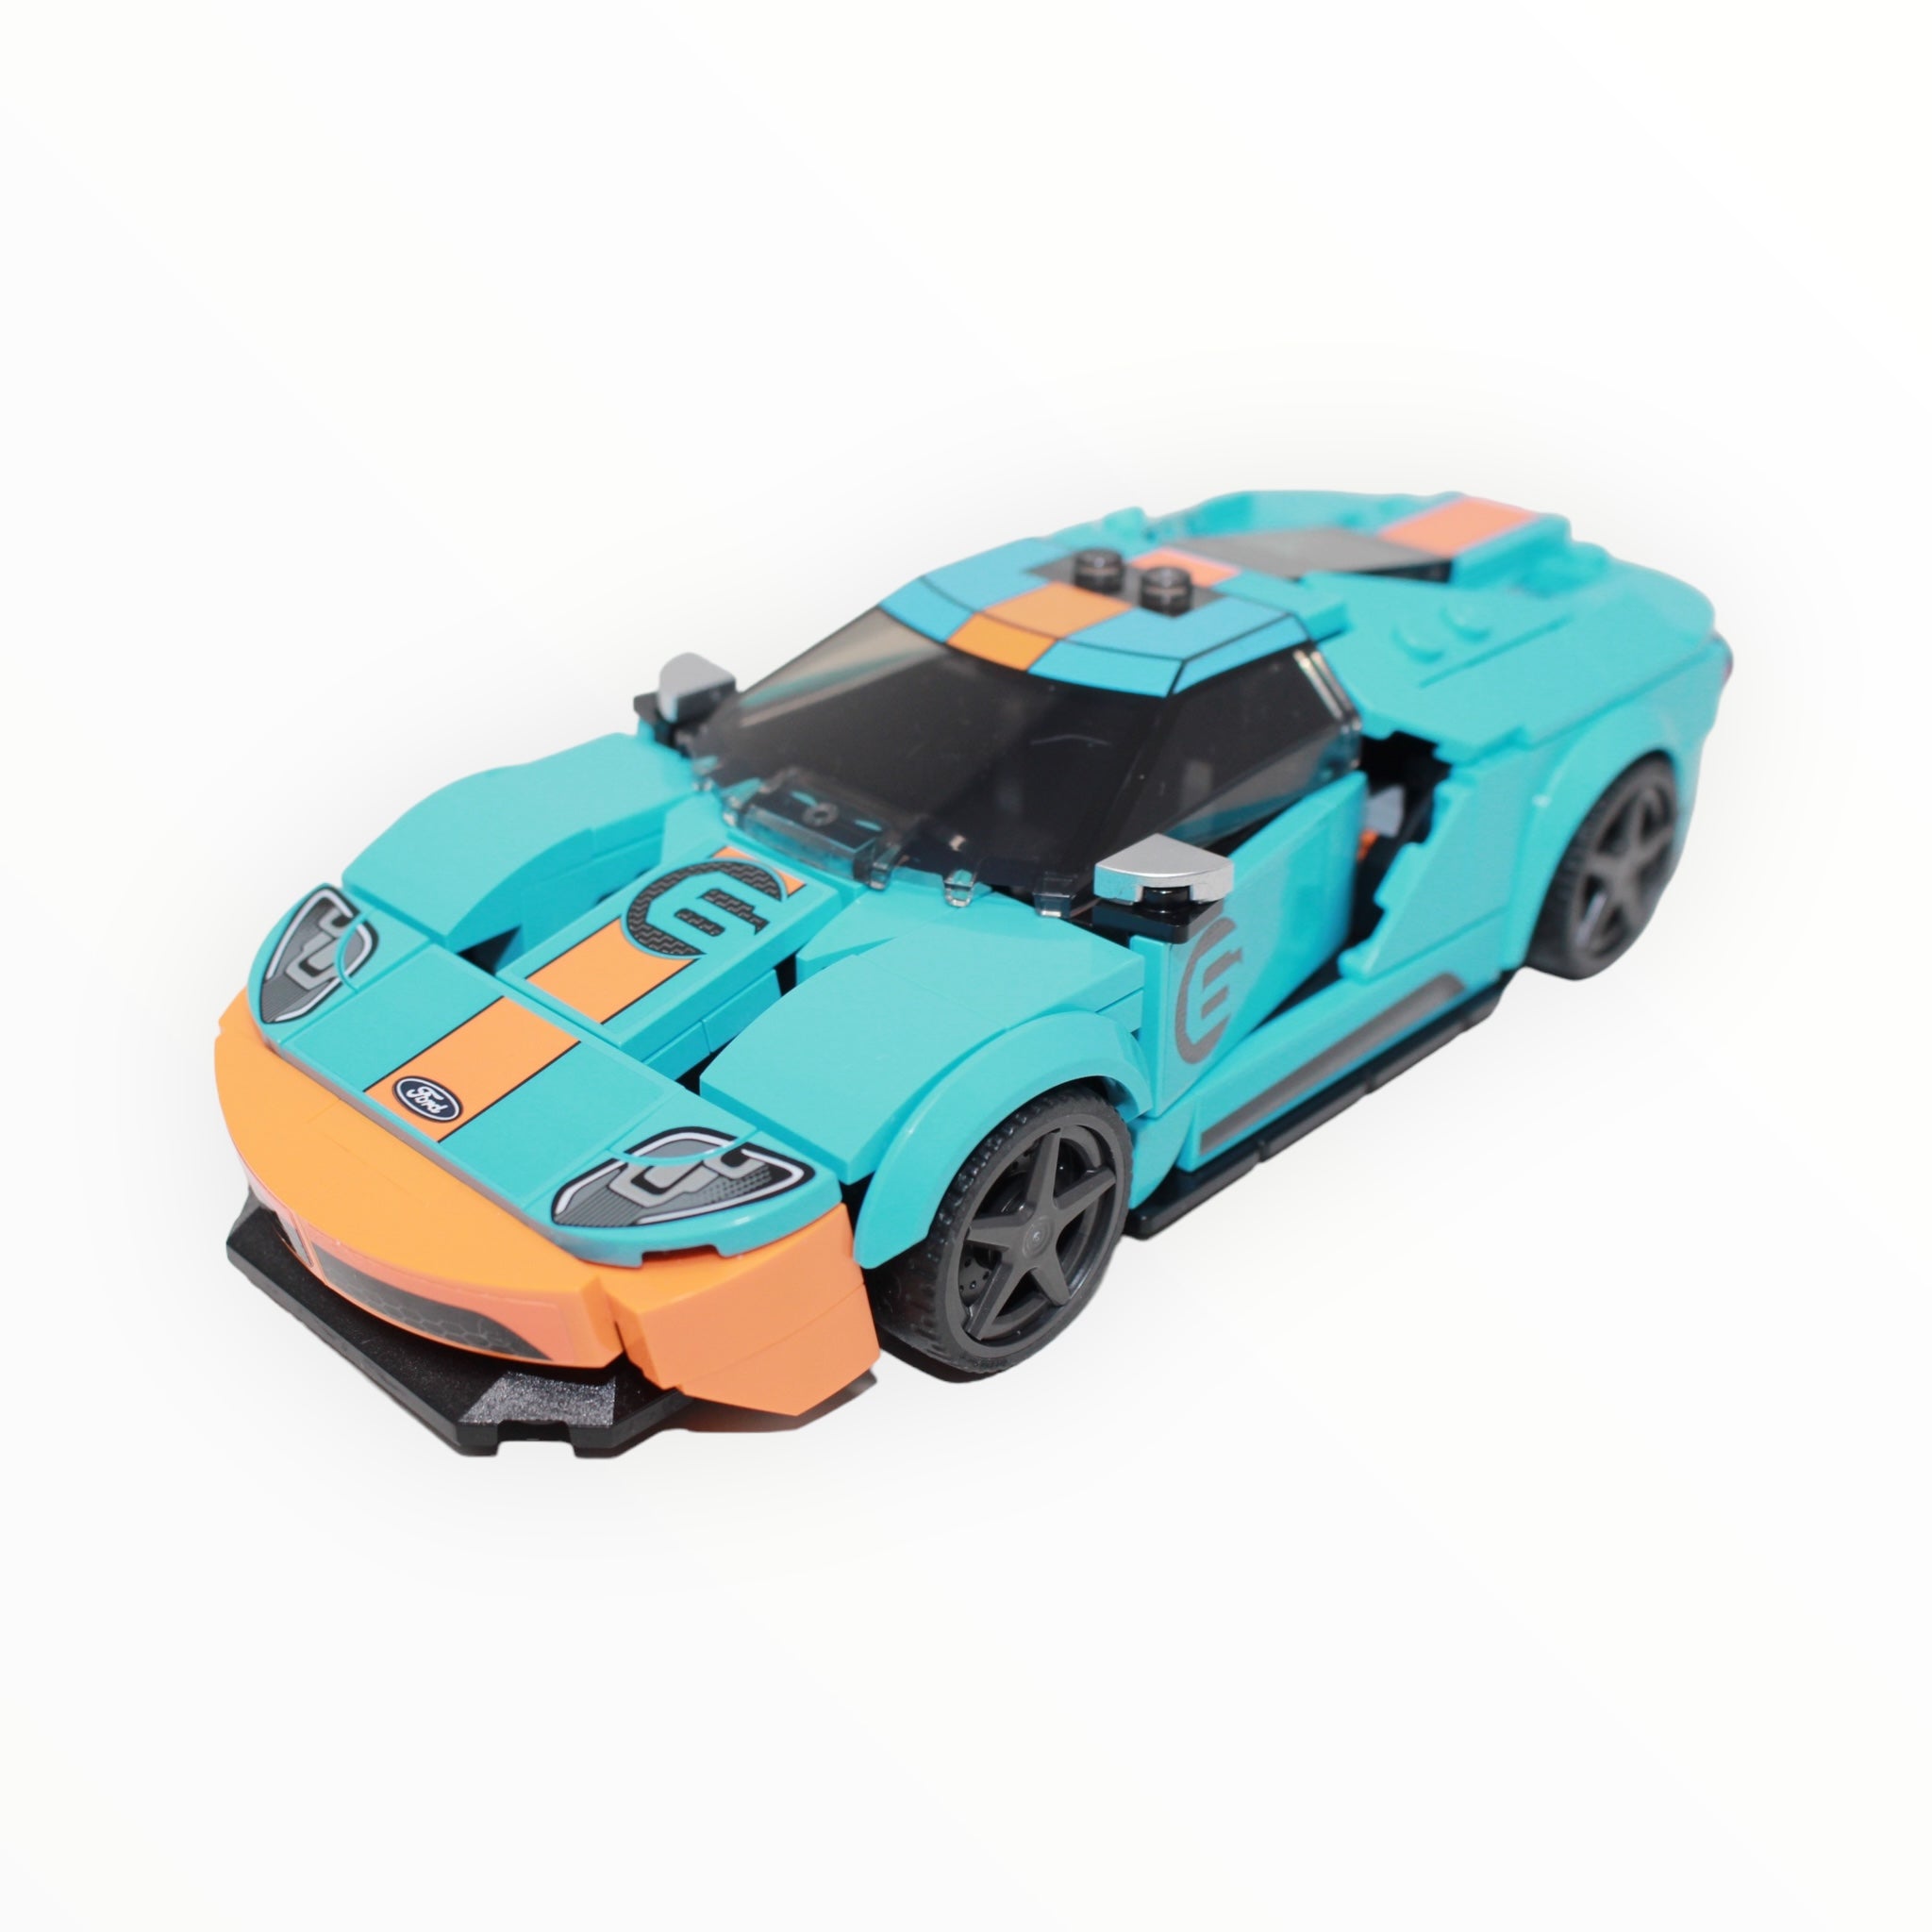 Used Set 76905 Speed Champions Ford GT Heritage Edition & Bronco R